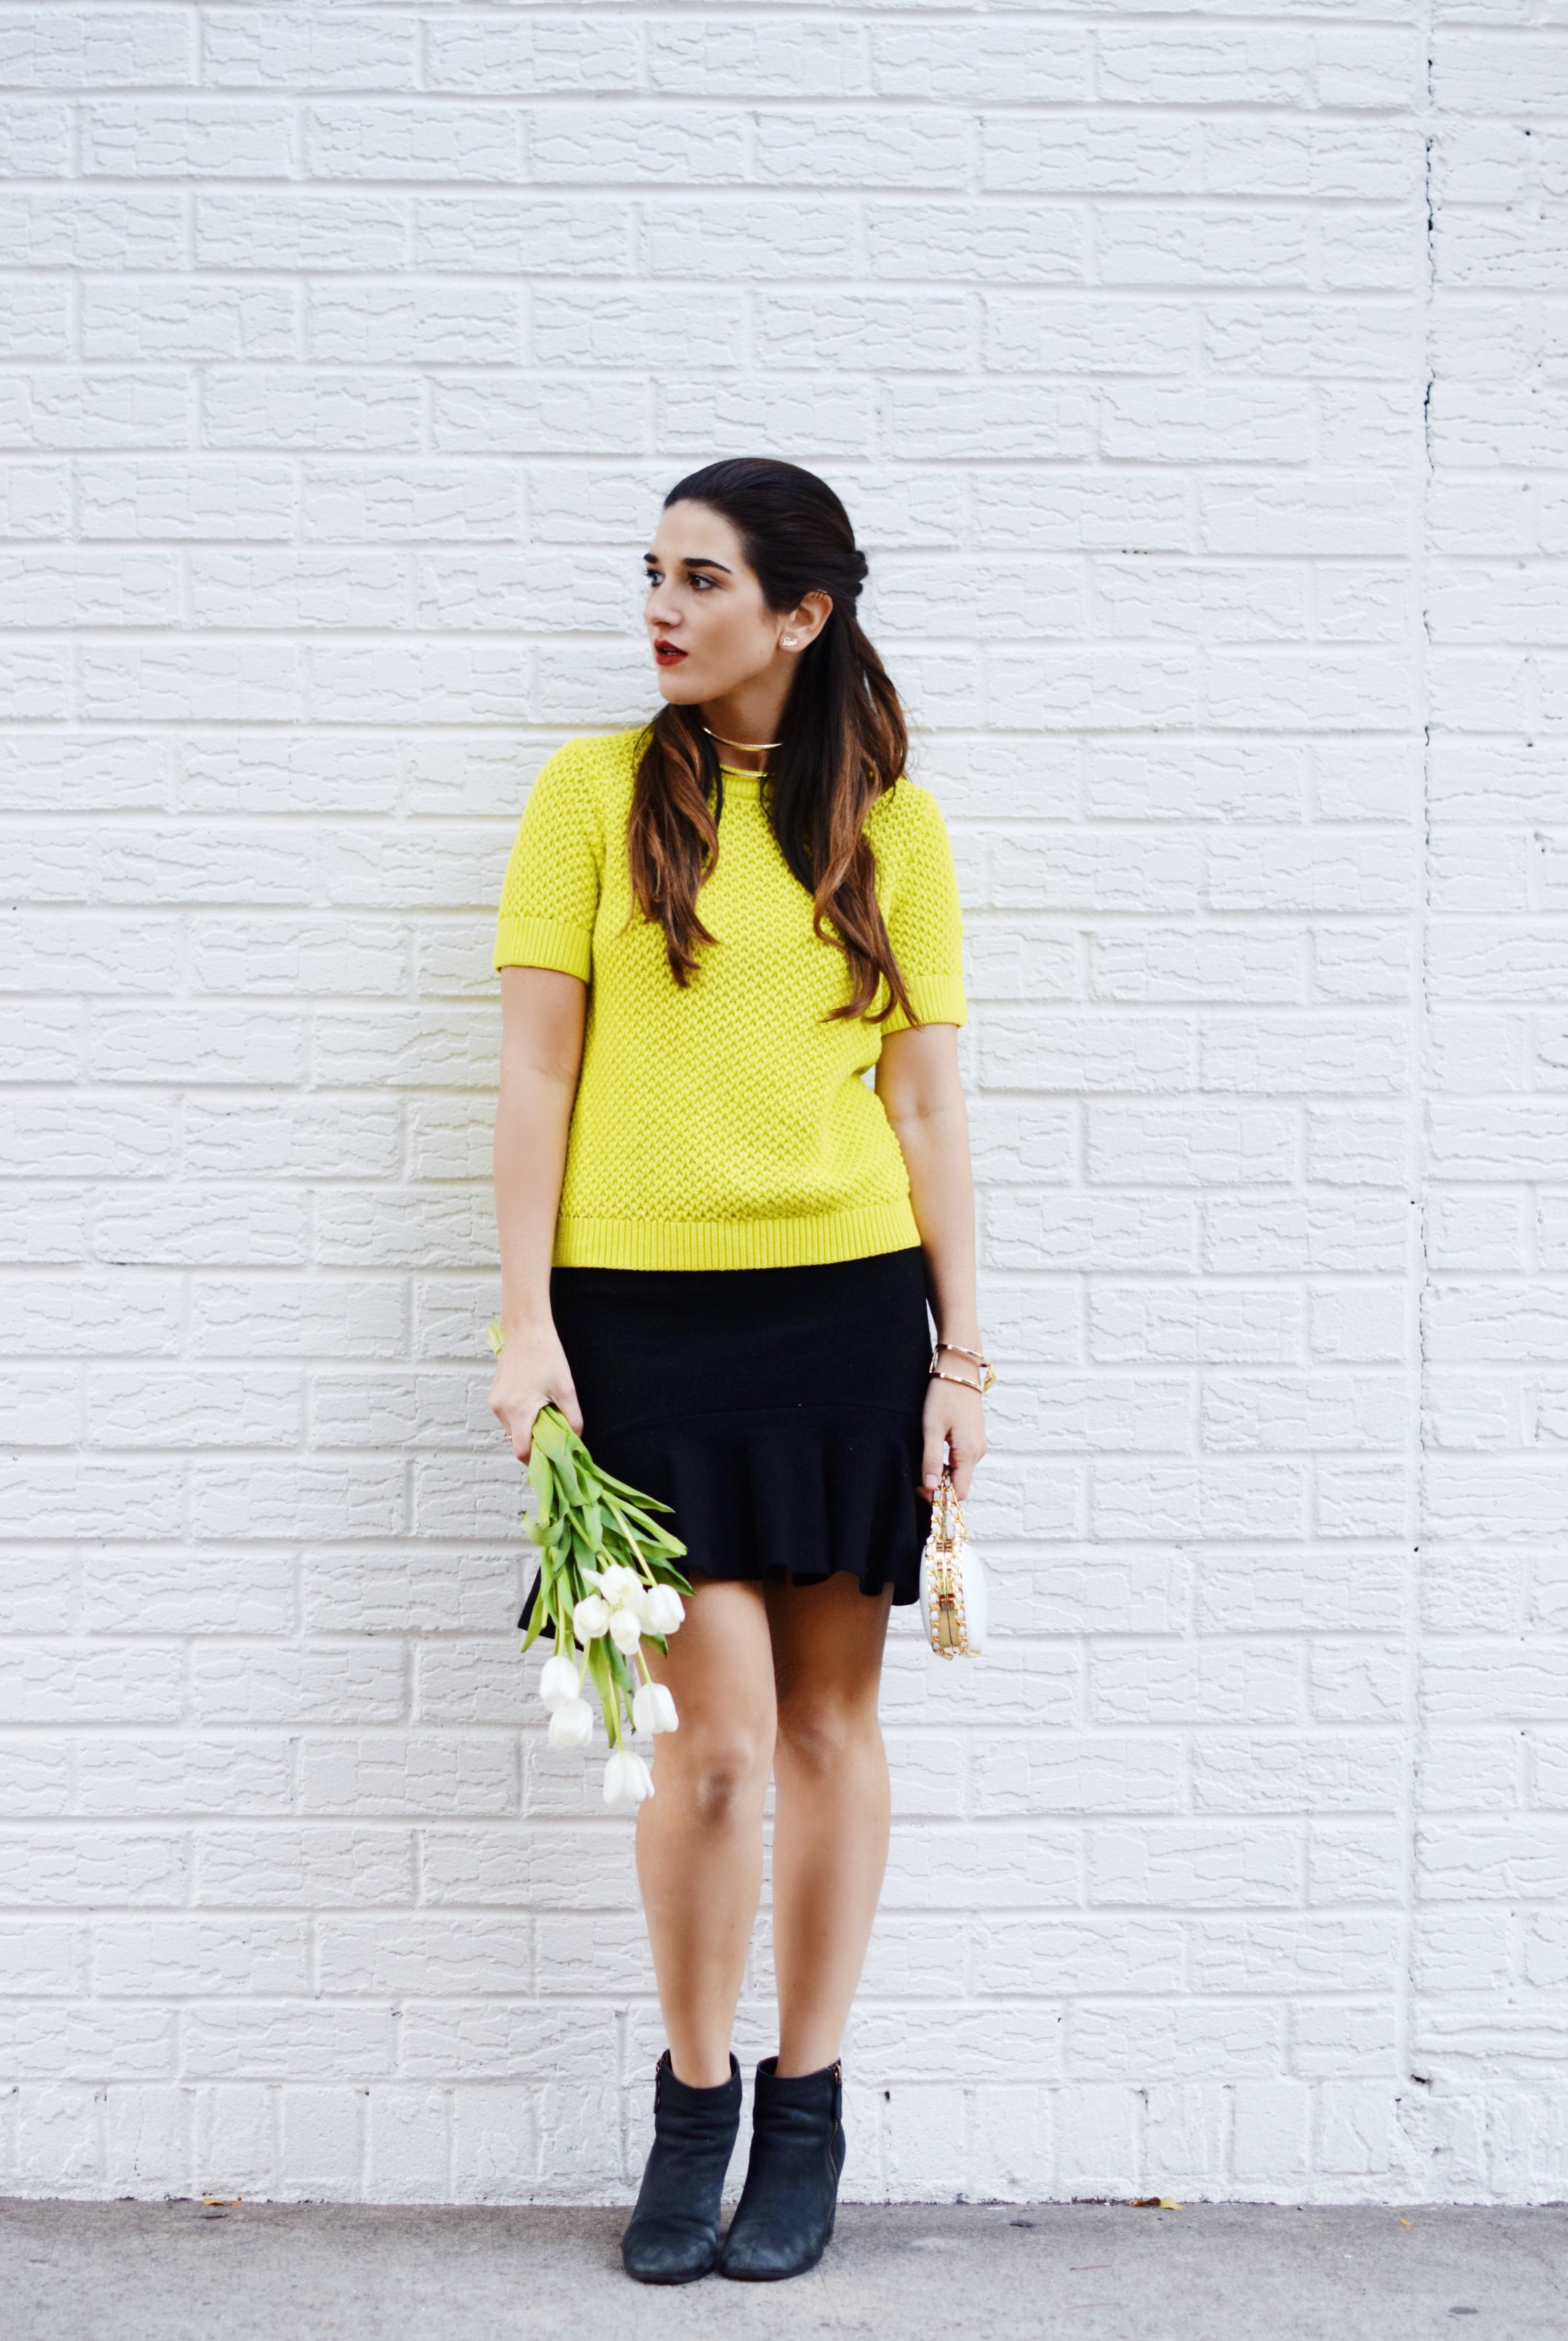 White Prince Minaudiere Erin Dana Louboutins & Love Fashion Blog Esther Santer NYC Street Style Blogger Bag Giveaway Gold Jewelry Lydell Bracelet Collar Necklace Black Booties Flared Ruffle Skirt Neon Yellow Sweater Photoshoot Club Monaco Model Outfit.jpg